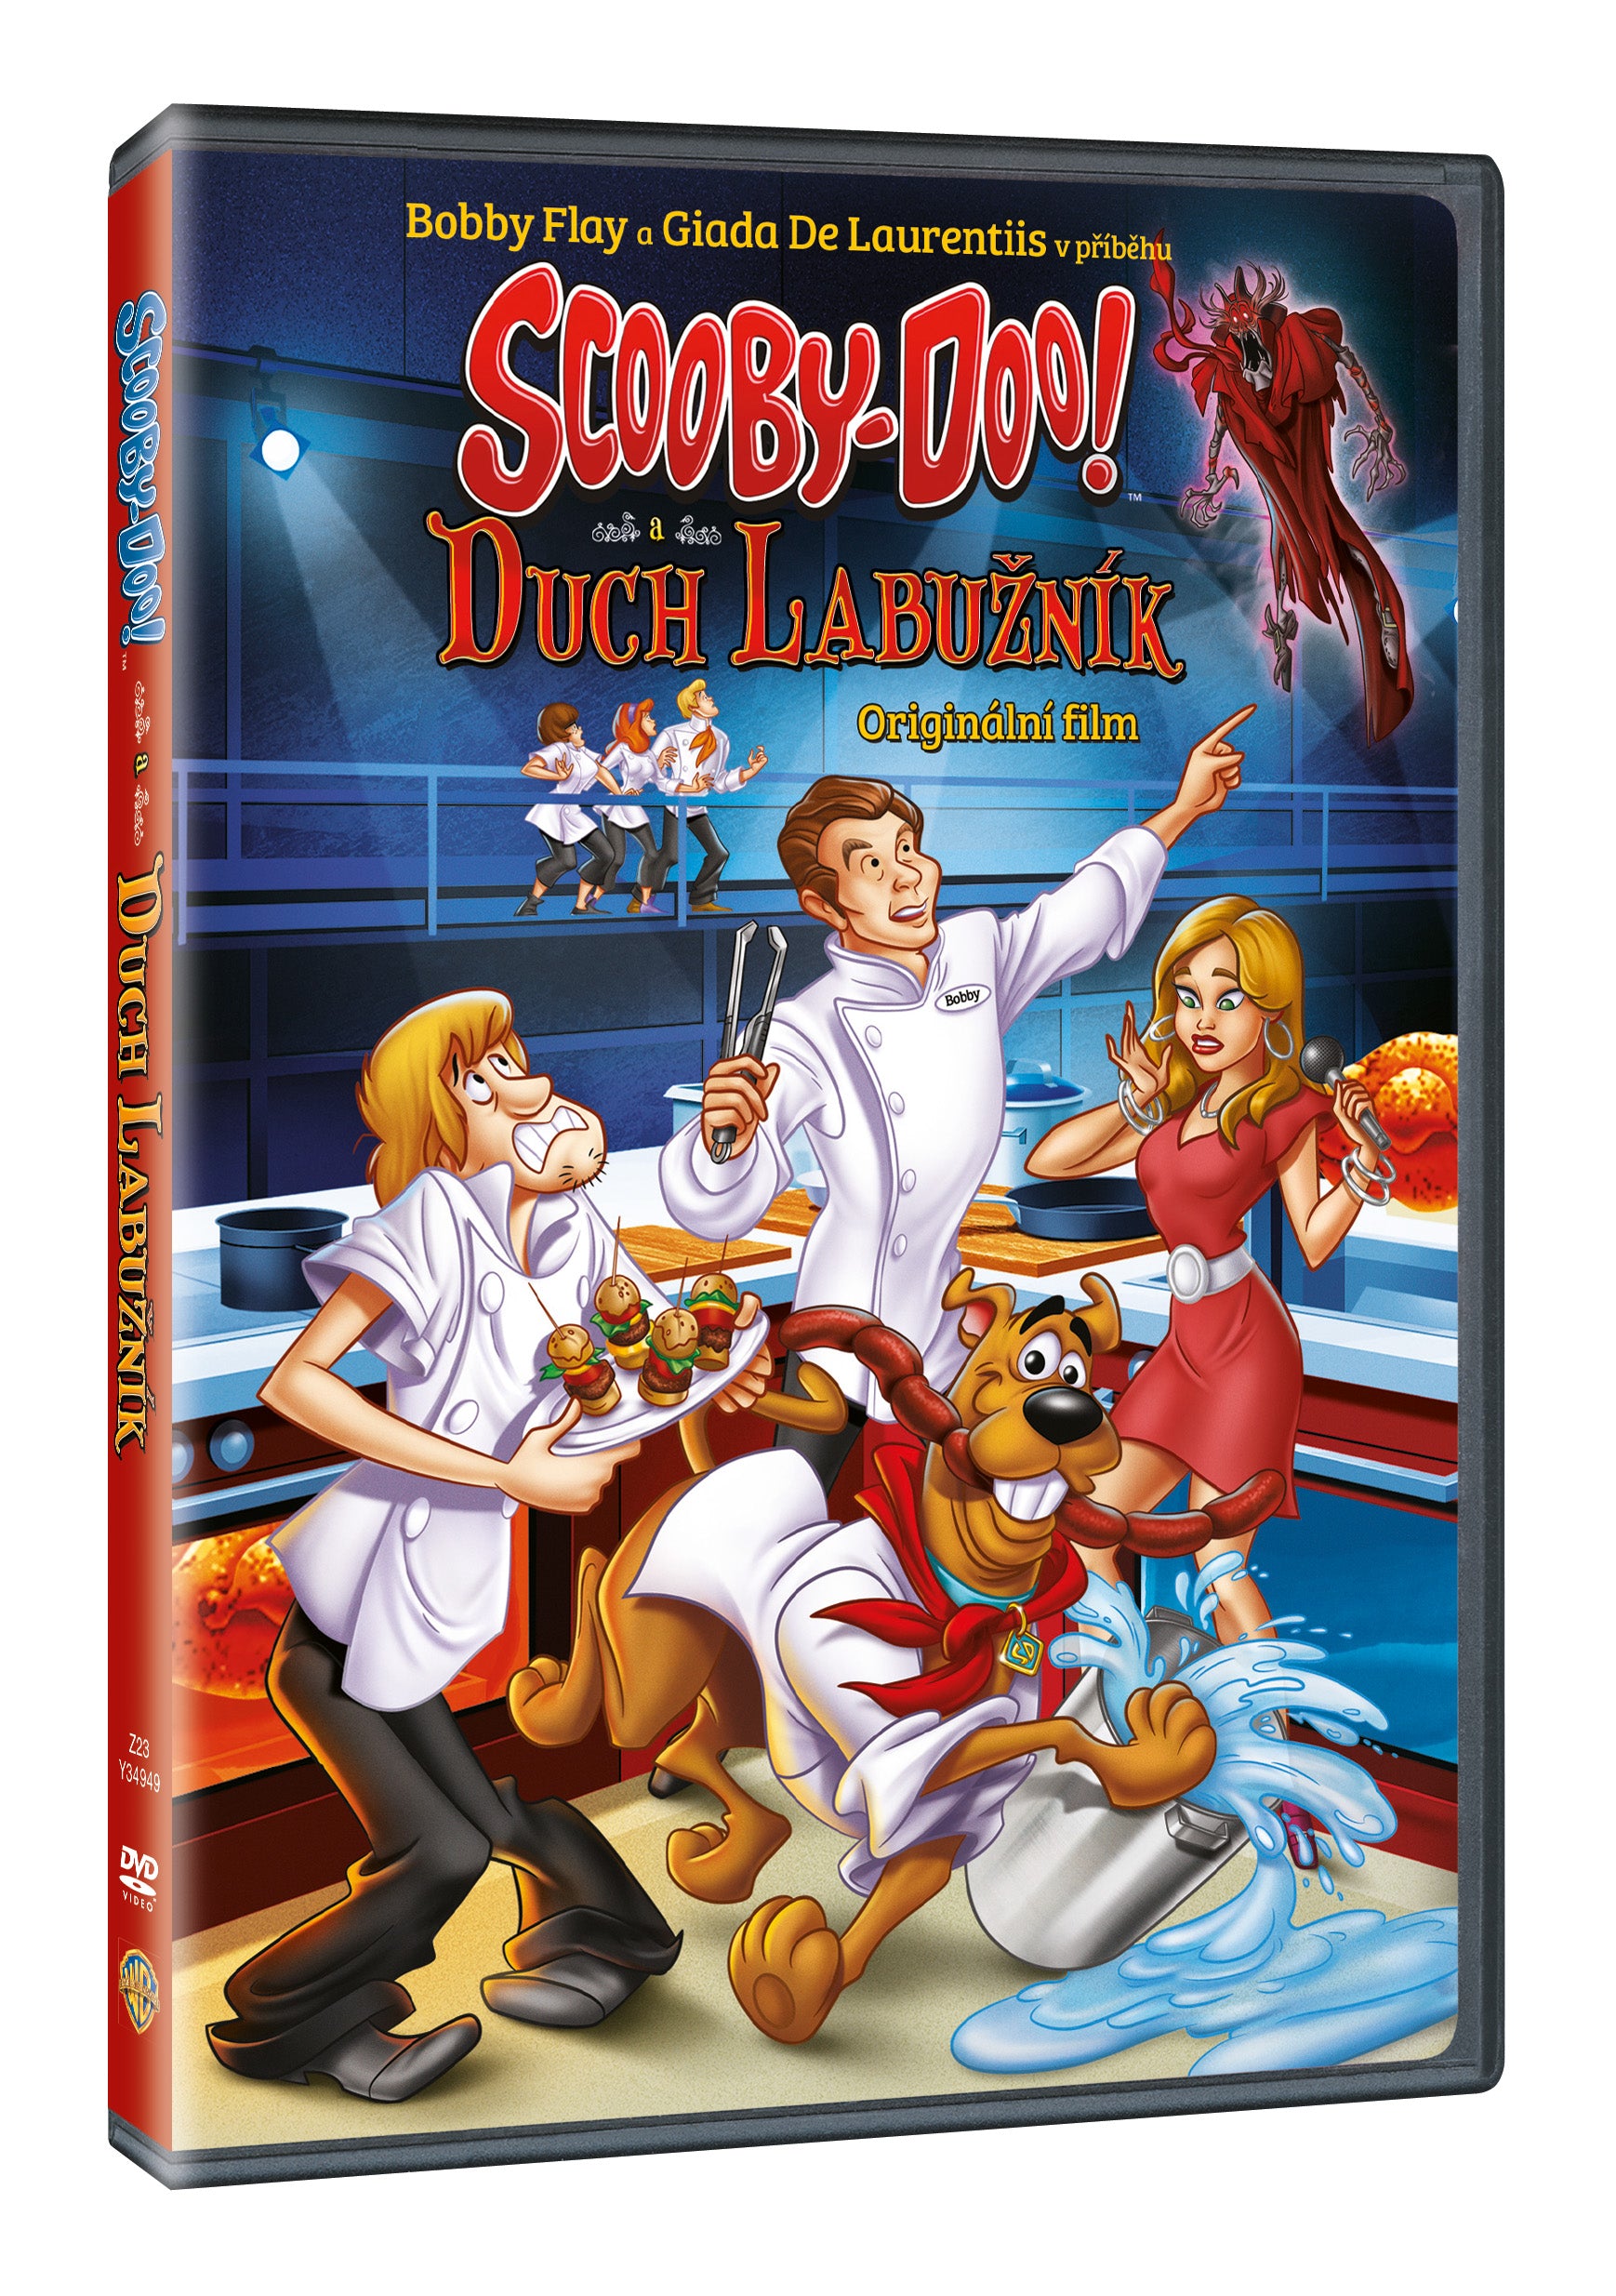 Scooby-Doo a Duch labuznik DVD / Scooby-Doo & The Gourmet Ghost